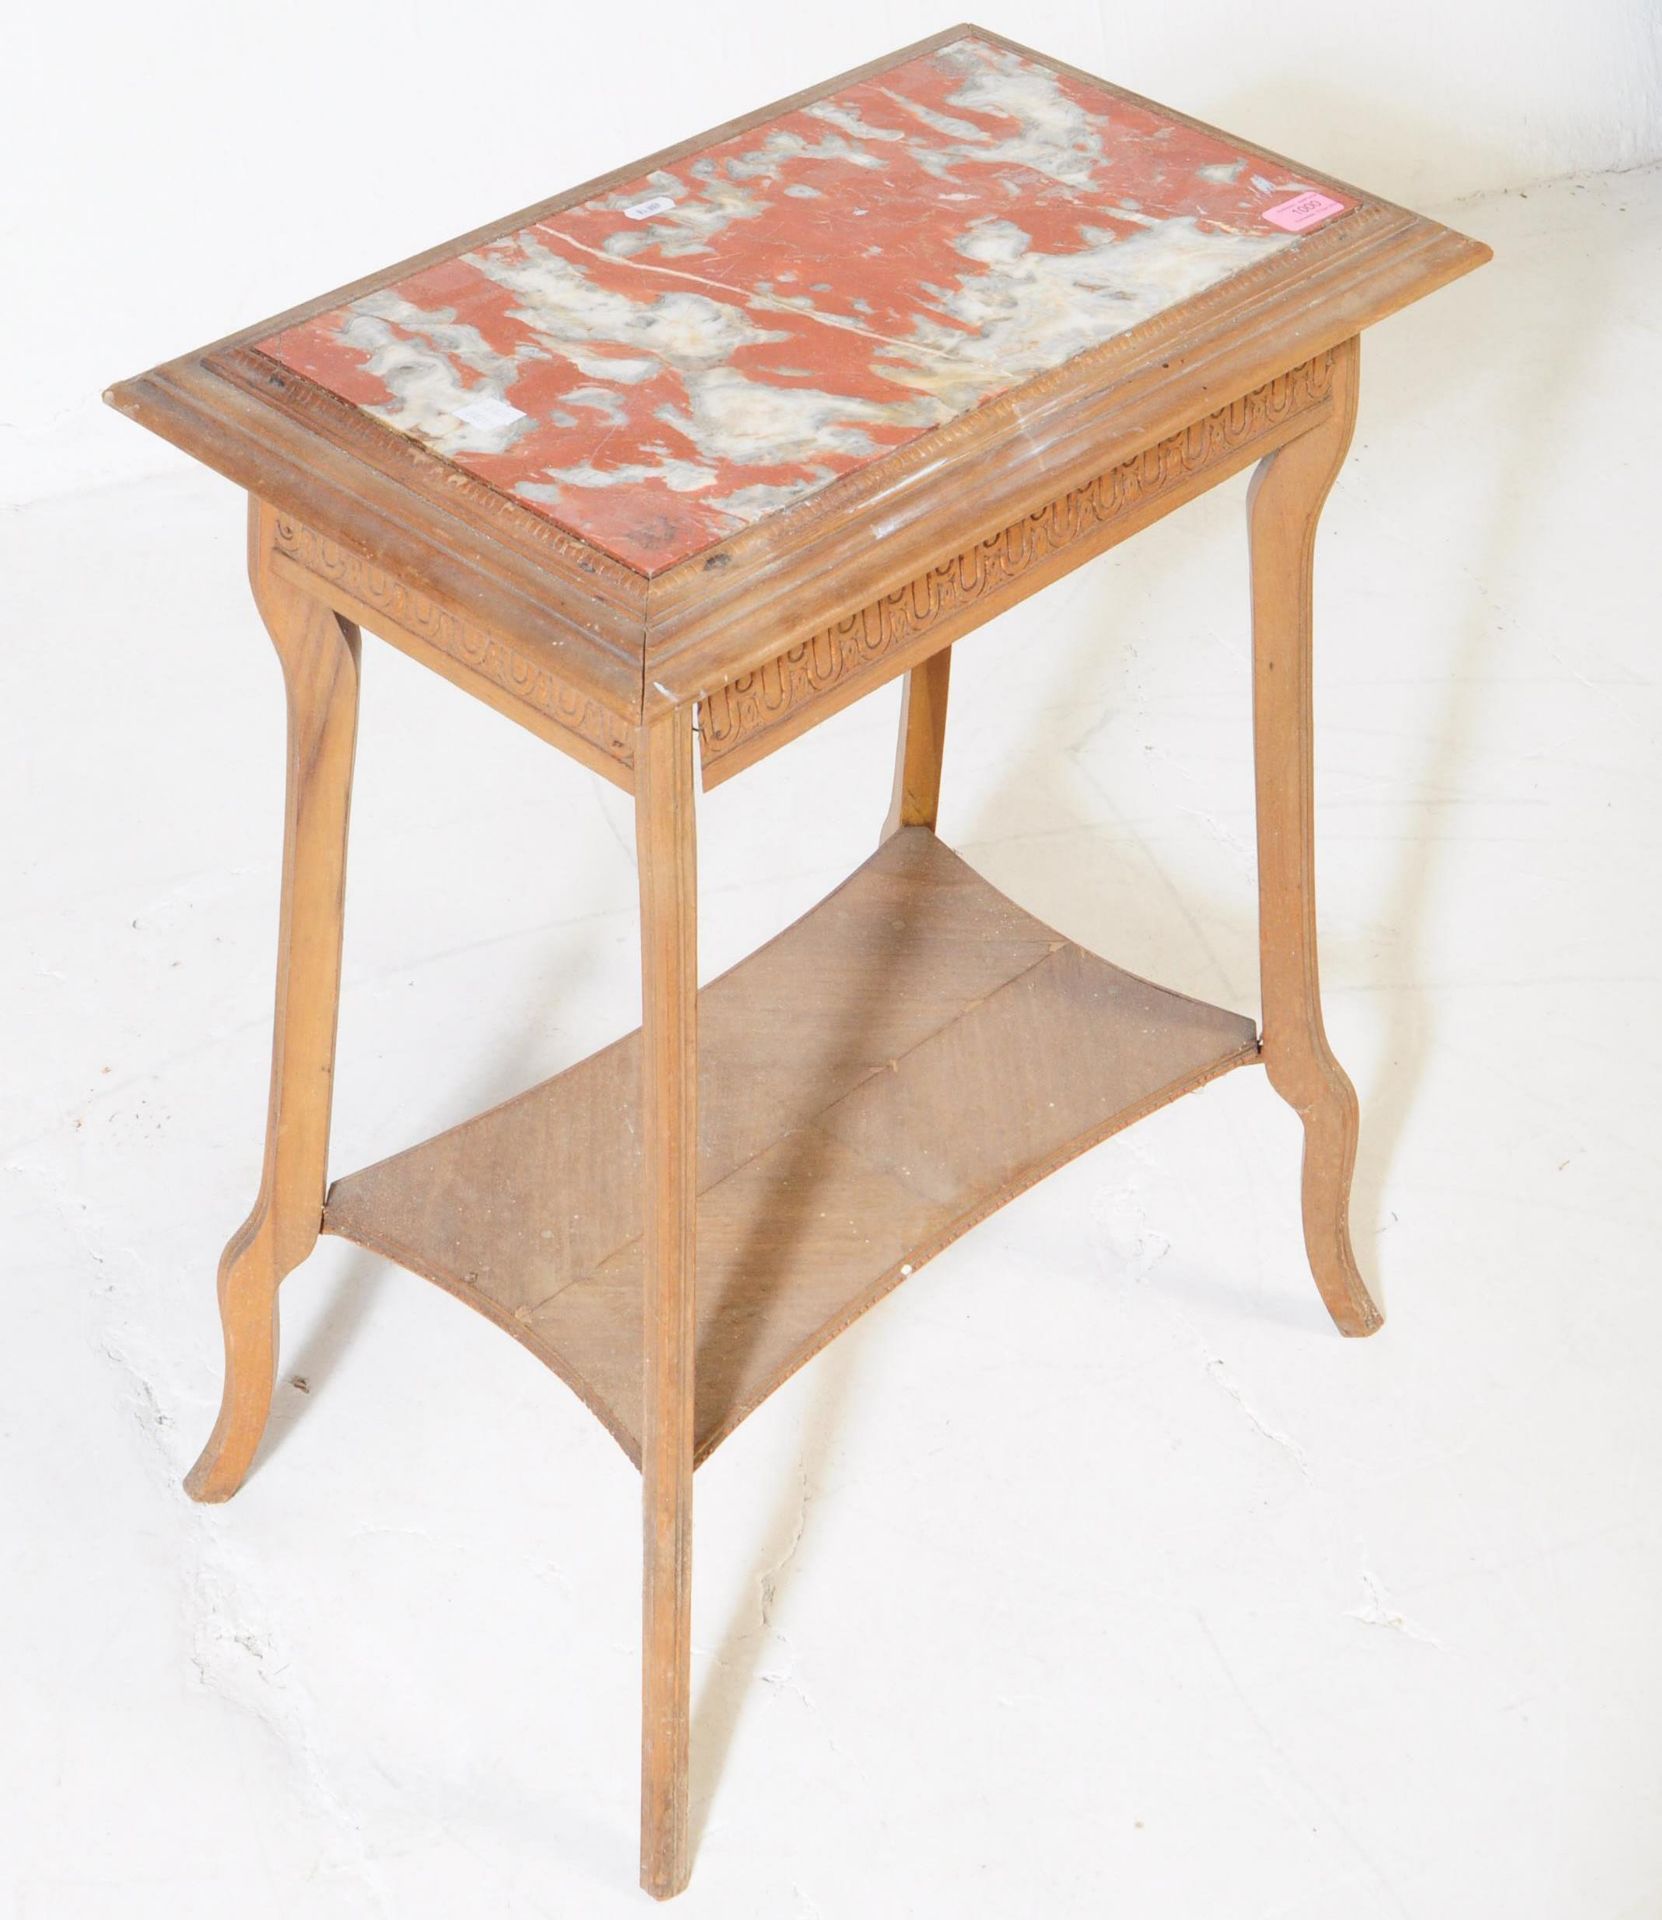 FRENCH EARLY 20TH CENTURY ARTS & CRAFTS MARBLE TOP TABLE - Image 2 of 5